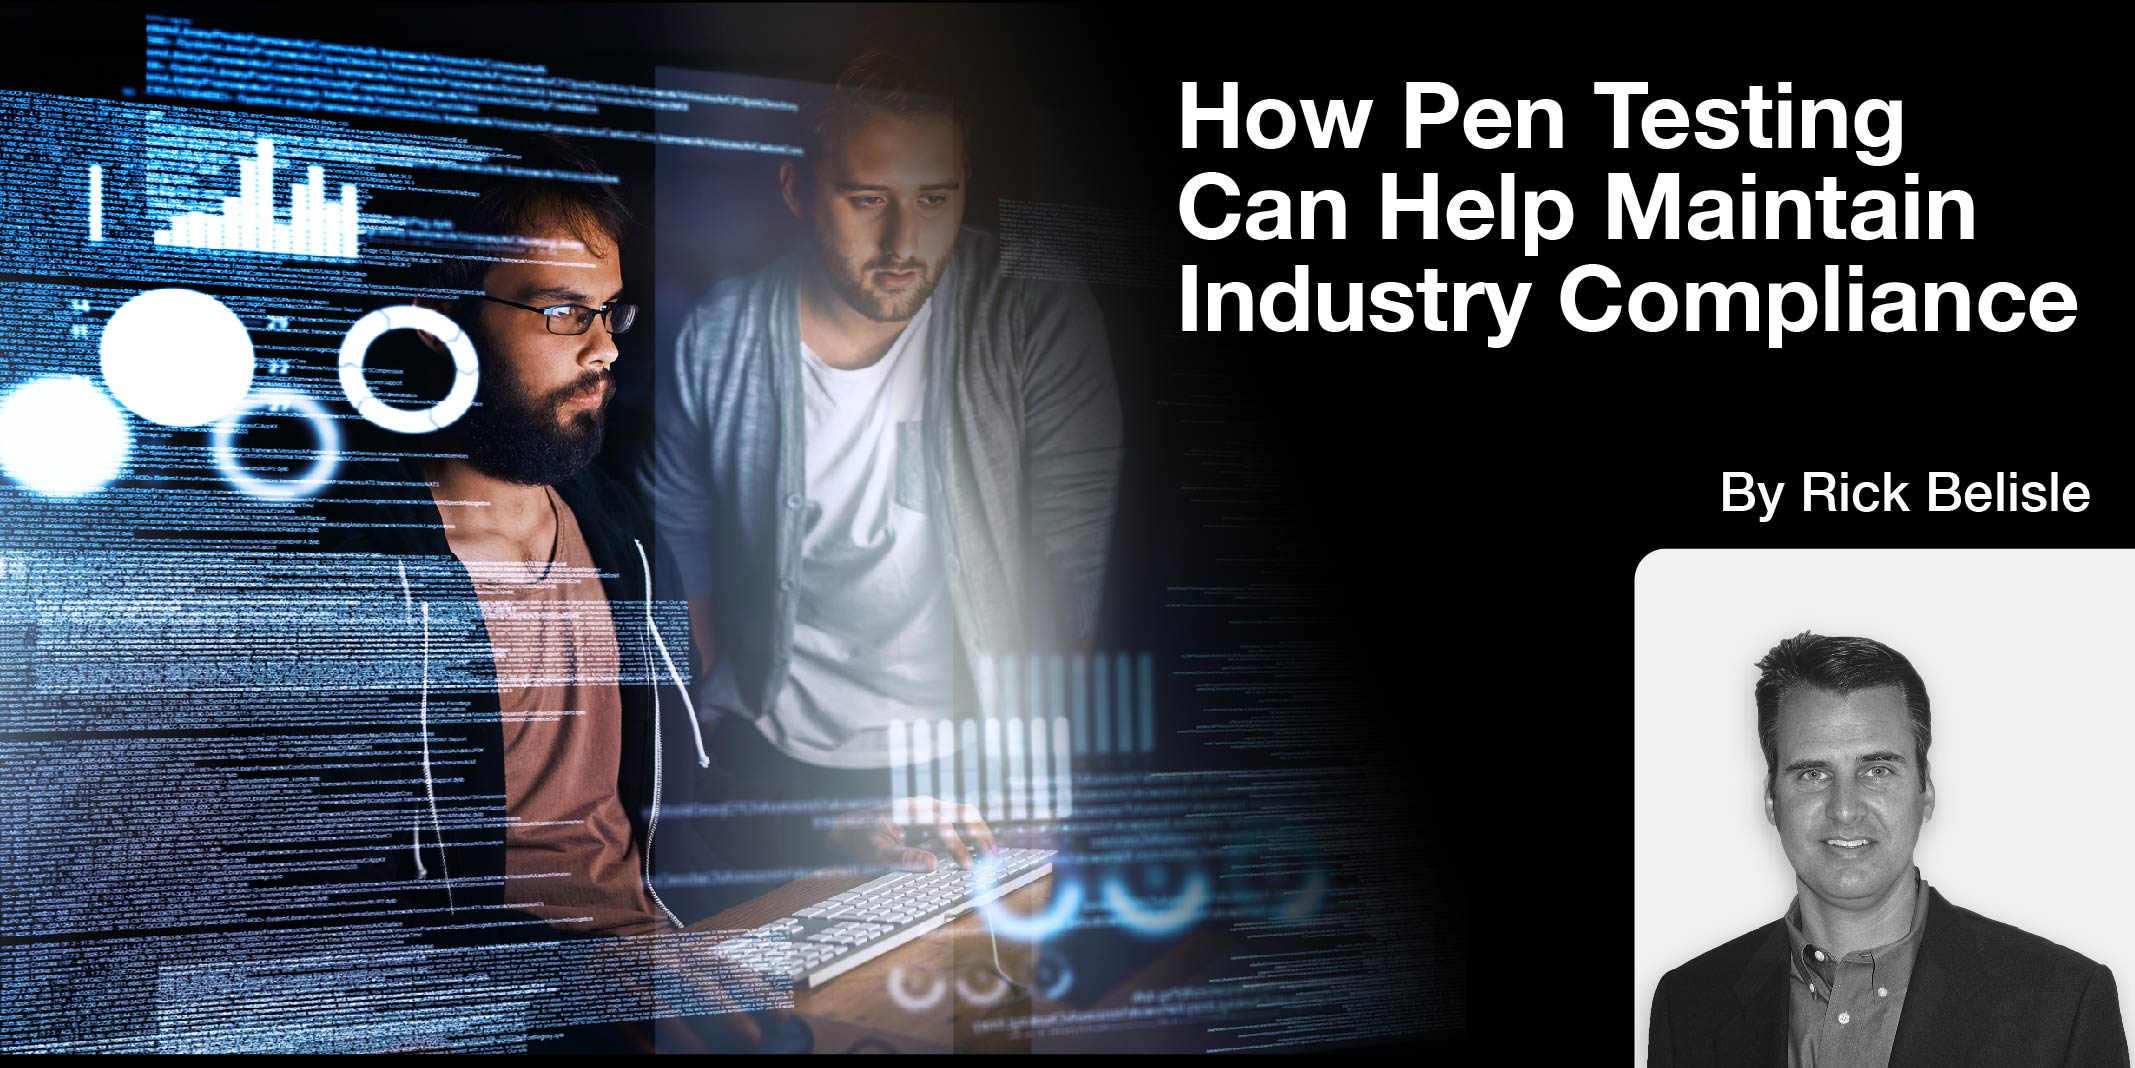 How Pen Testing Can Help Maintain Industry Compliance